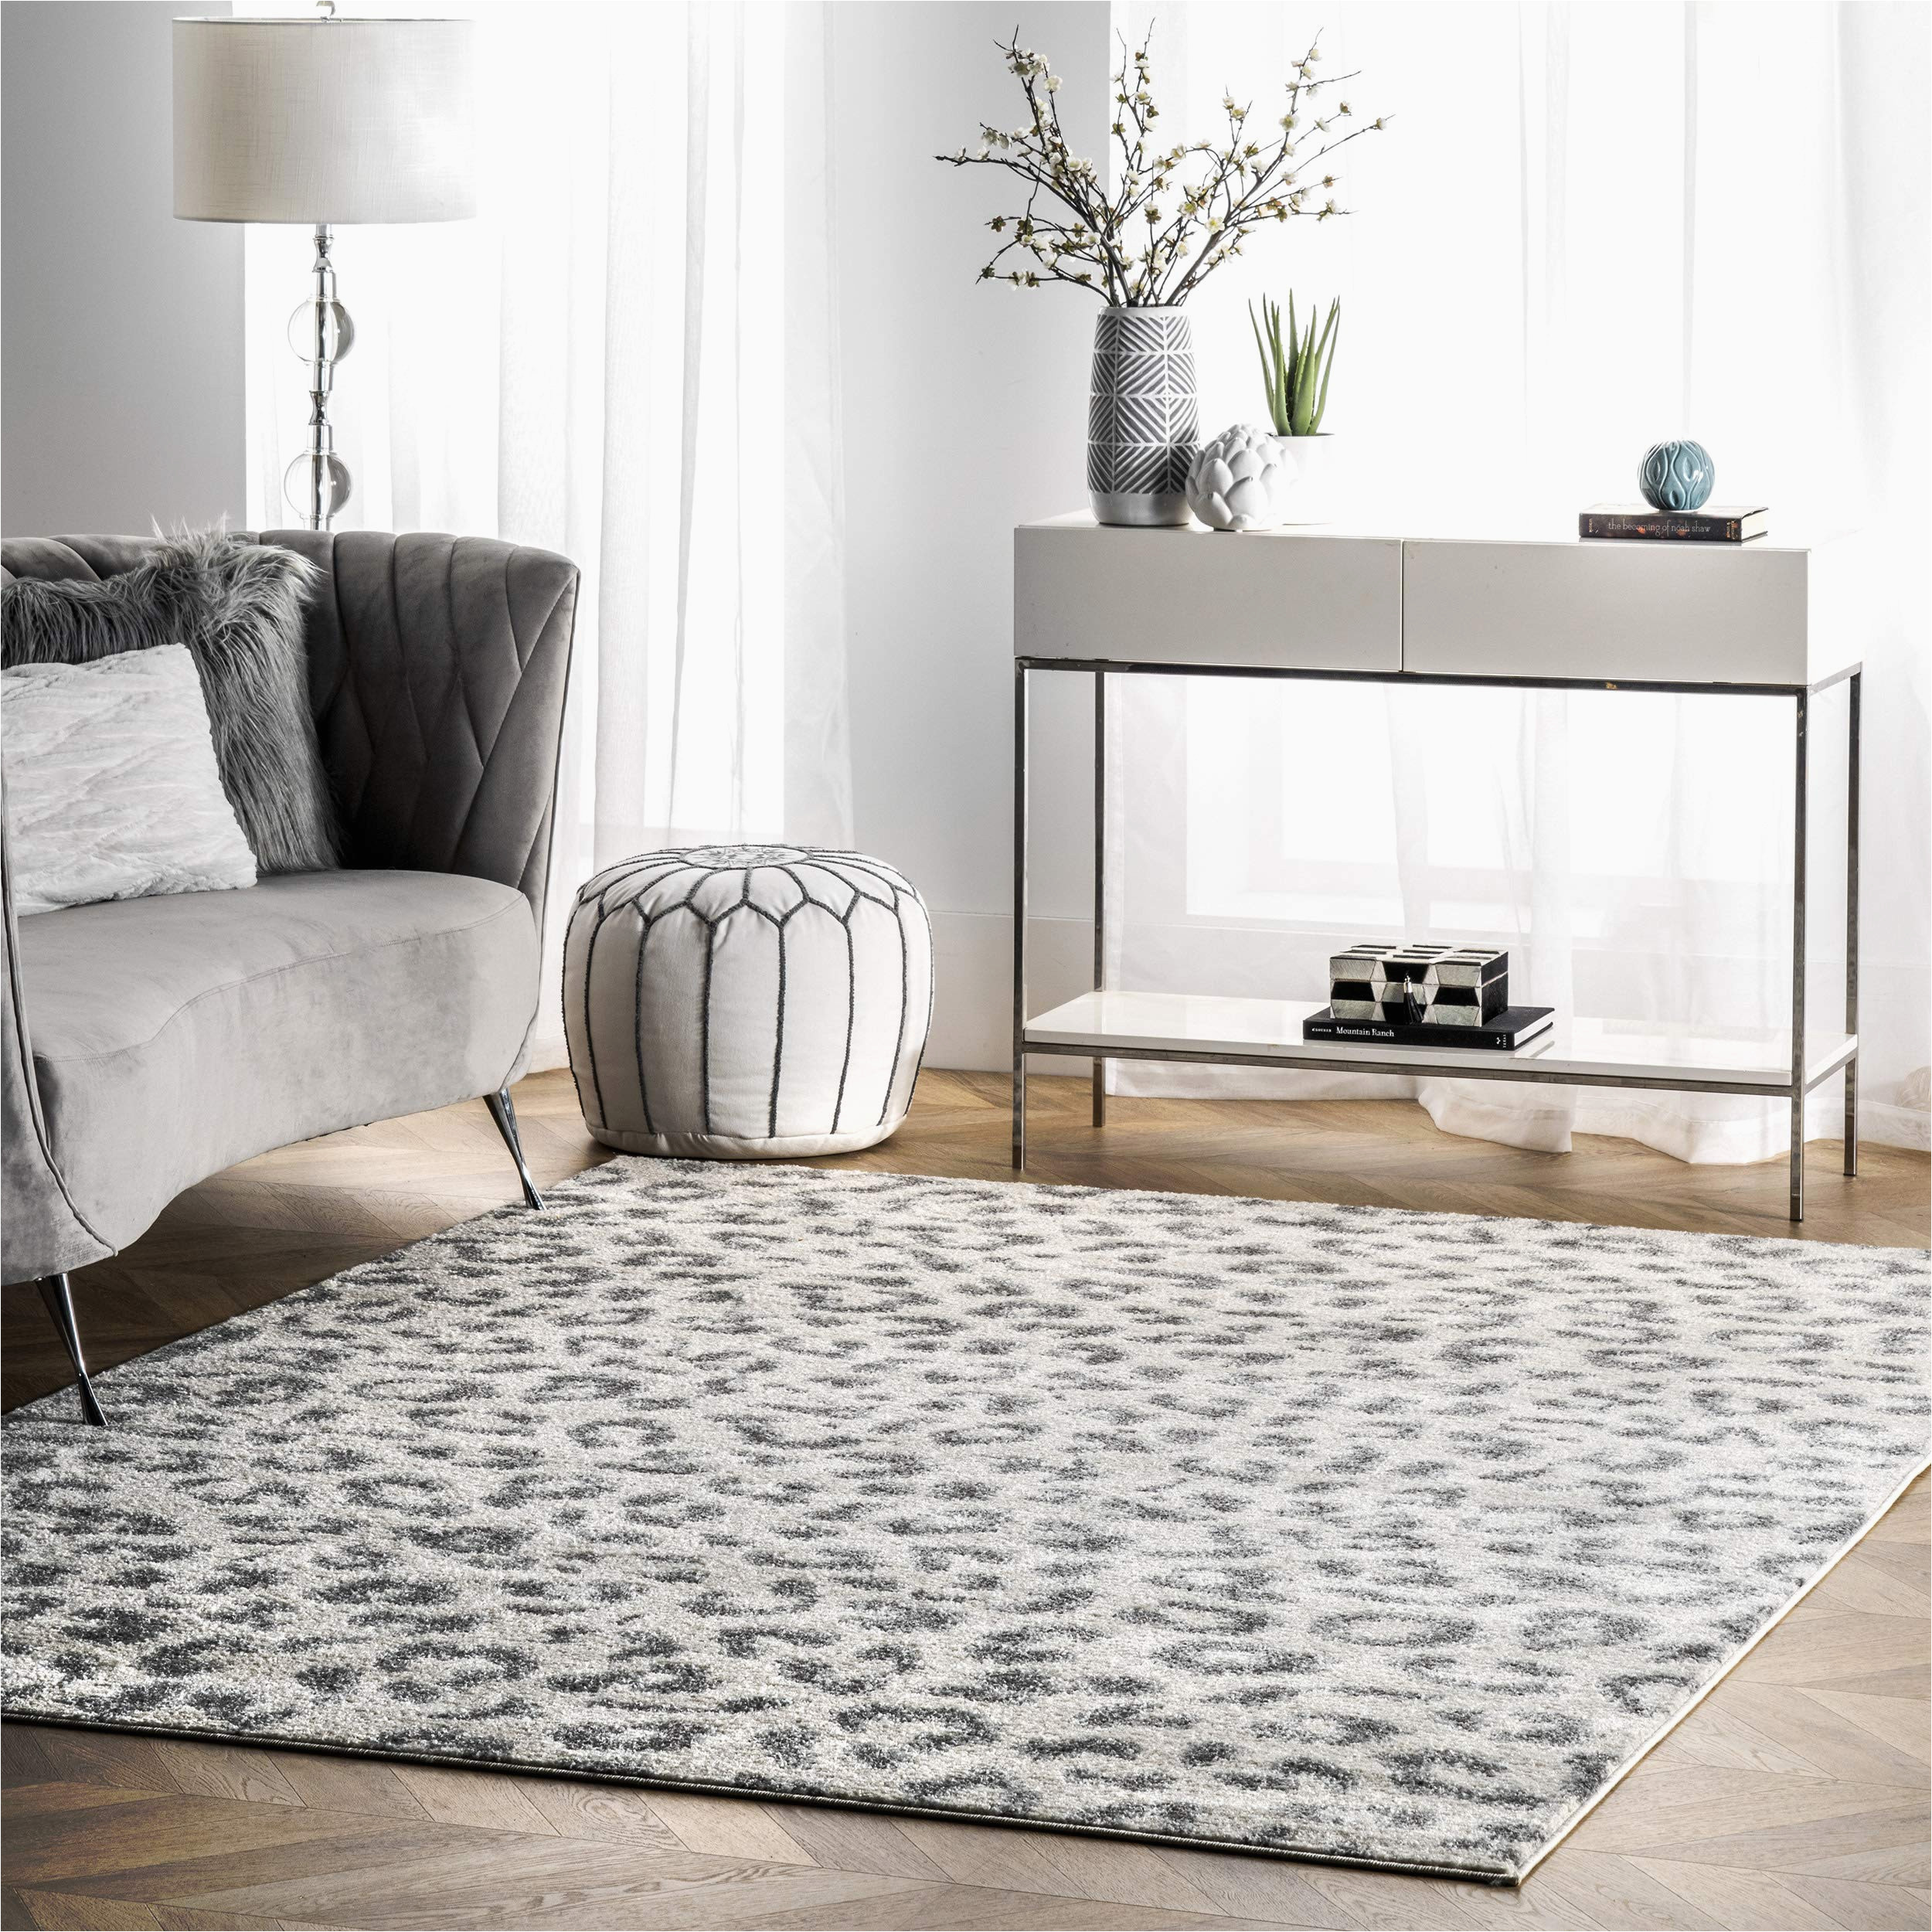 Home Depot area Rugs 8 X 10 Amazon.com: Nuloom Print Leopard area Rug, 8′ X 10′, Gray : Home …